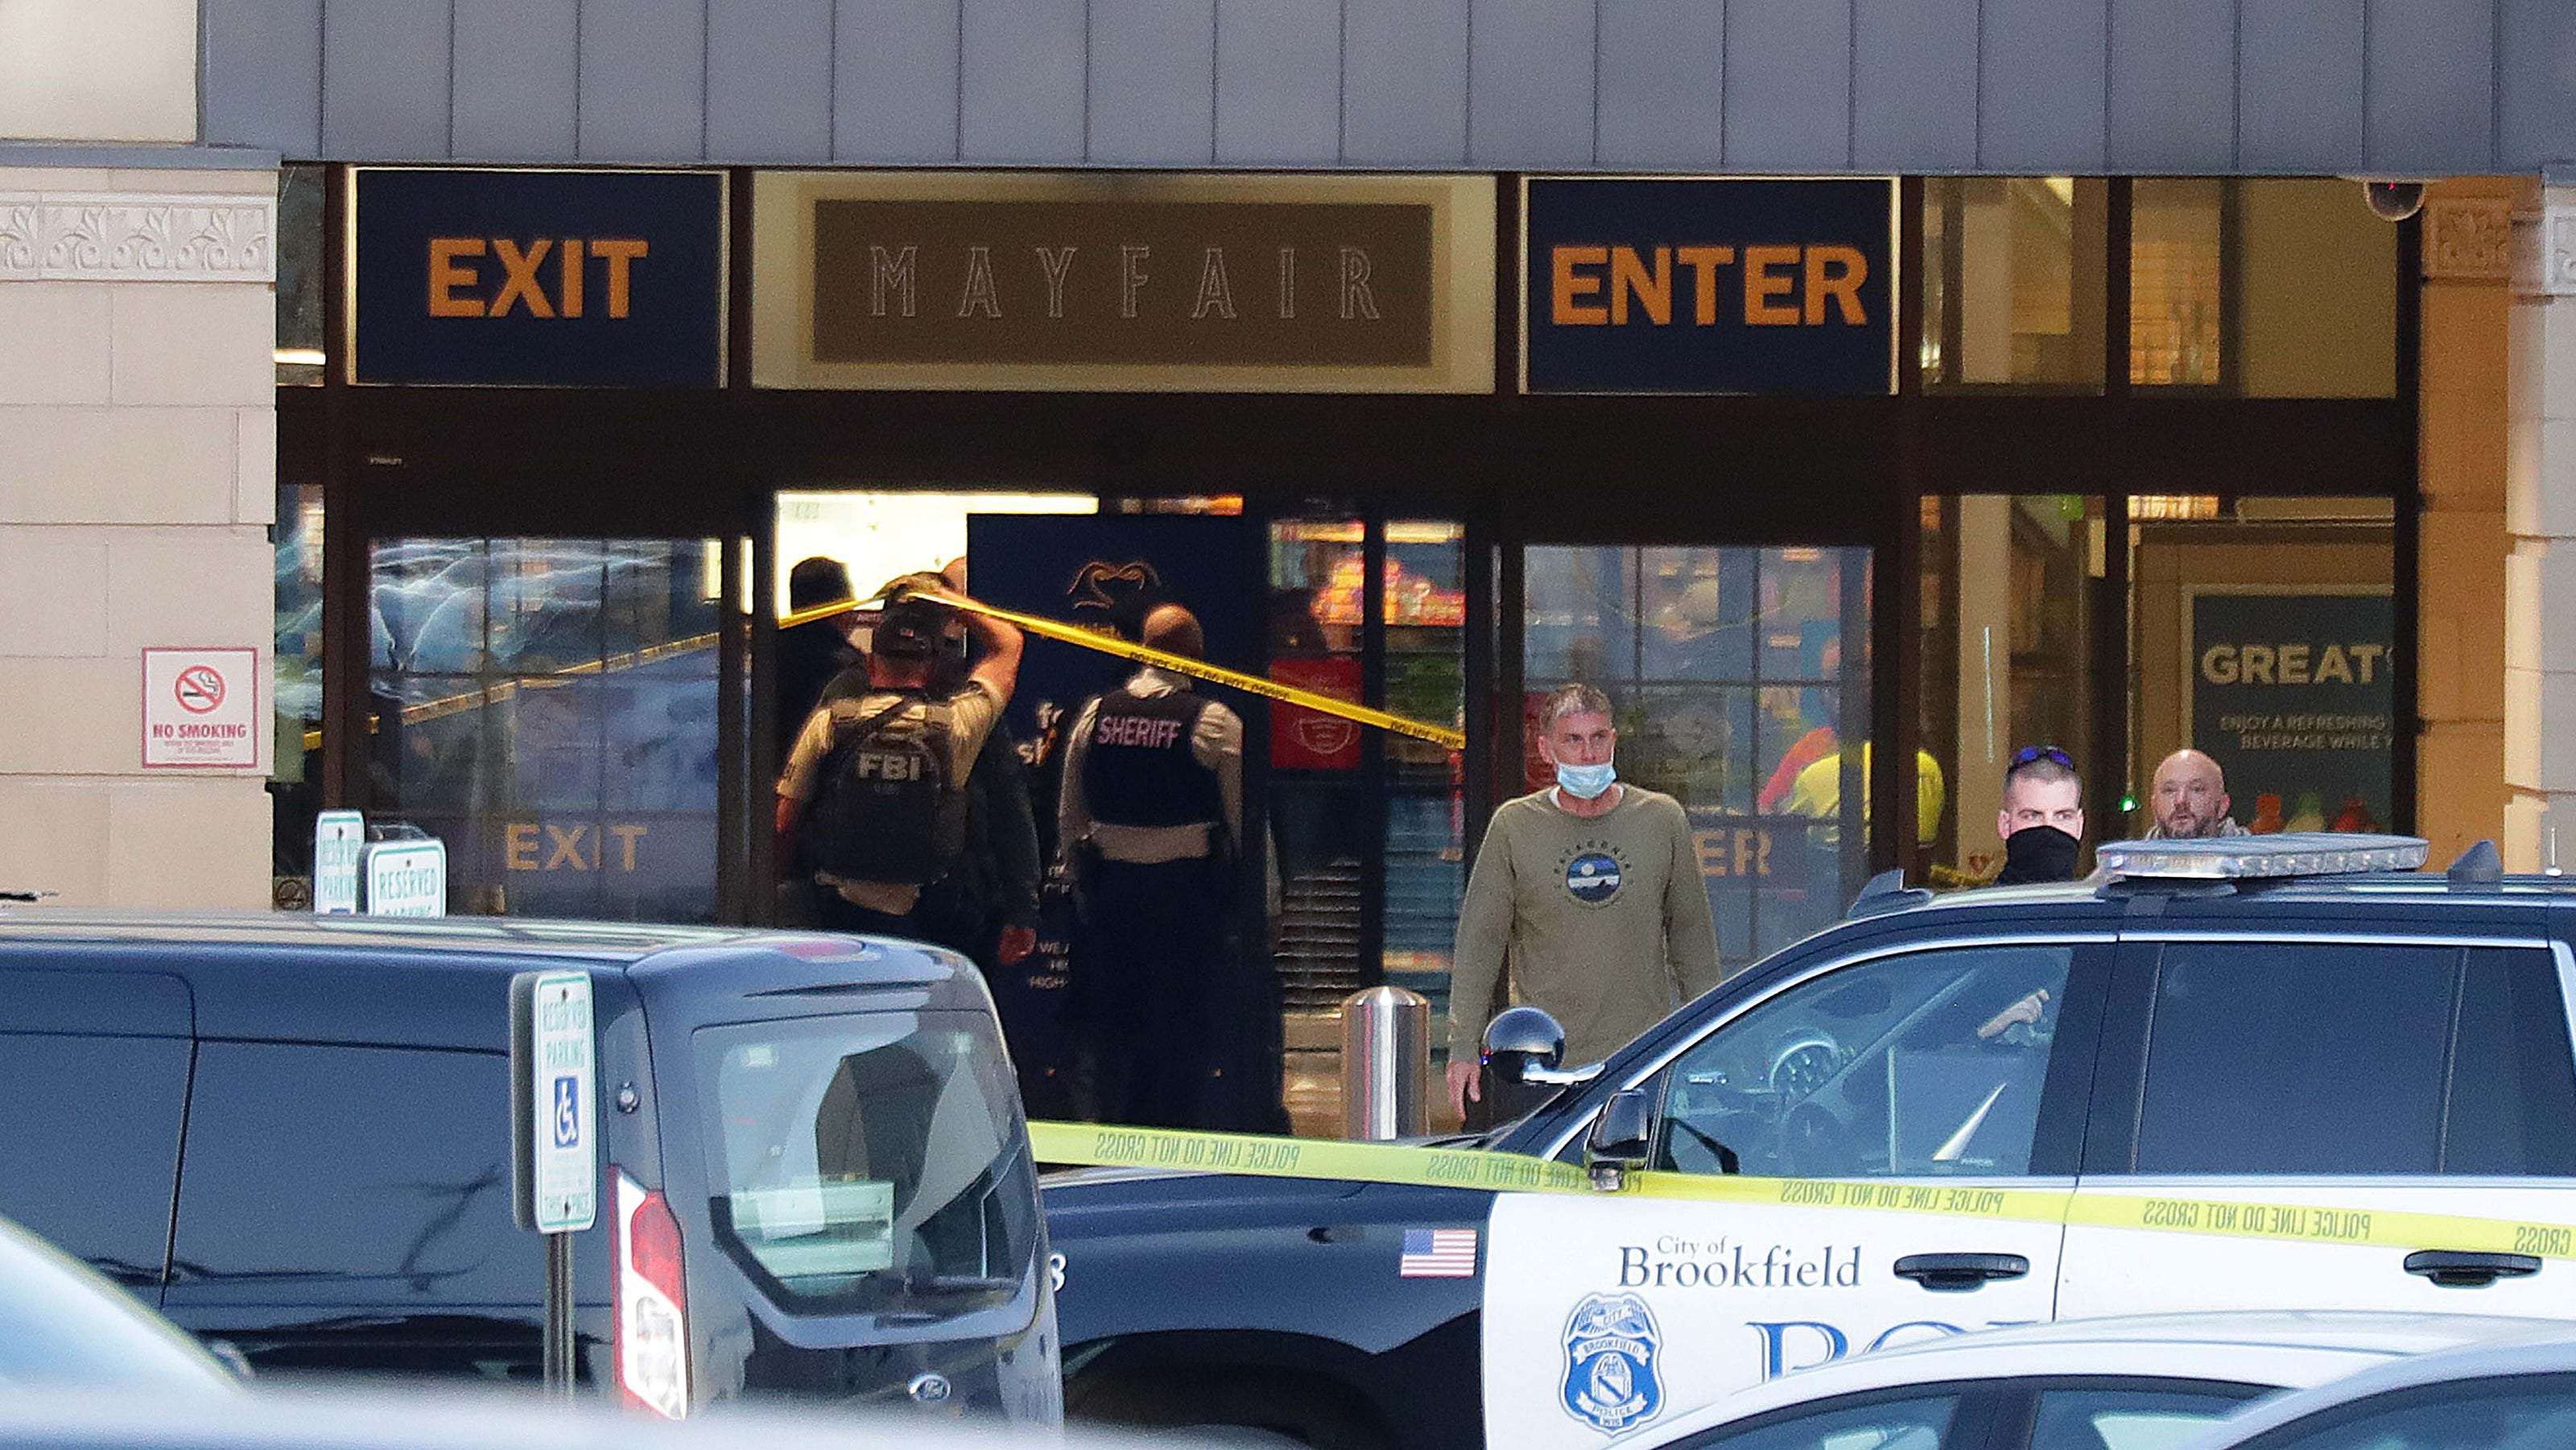 image for A 15-year-old boy has been arrested in connection with the Mayfair mall shooting